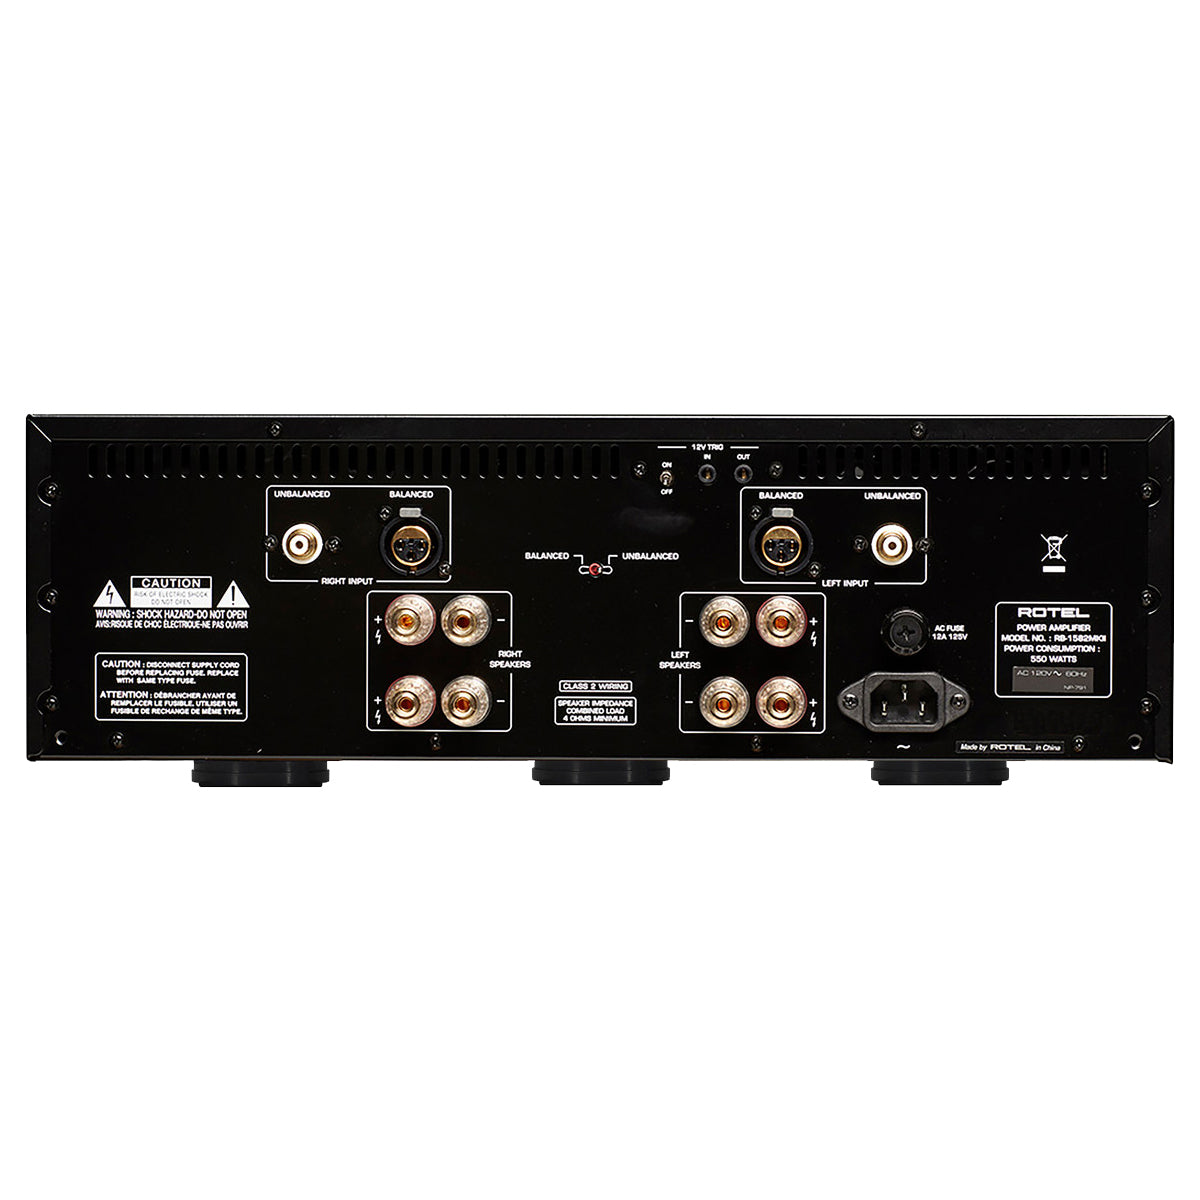 Rotel RB1582 MKII Stereo Power amplifier - Black - The Audio Experts